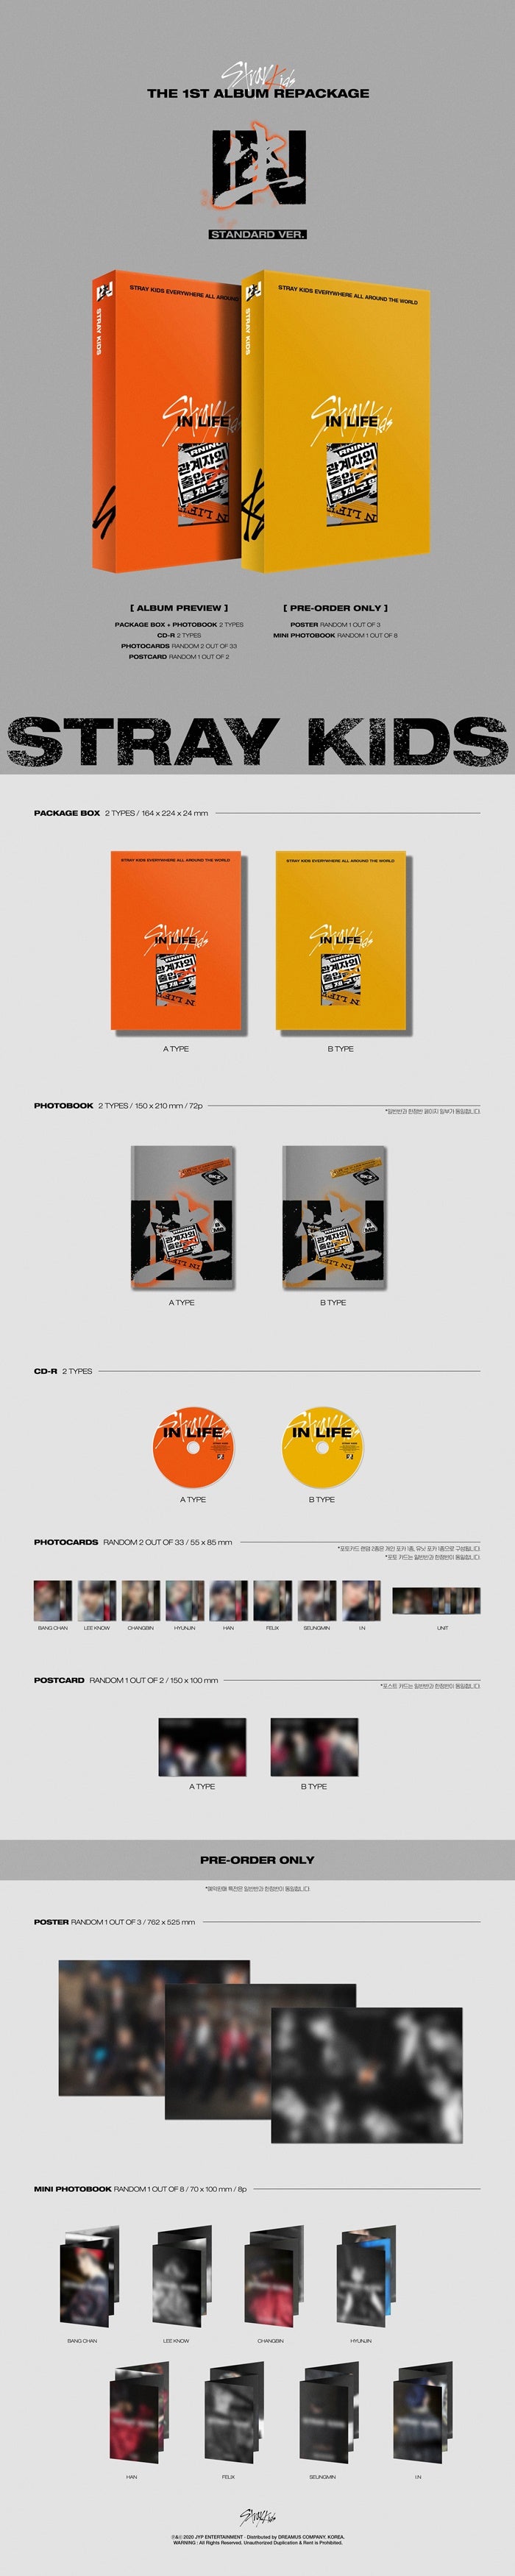 kpop merch official md Airplane Another Day Phobia Any Wow (Lee Know, Hyunjin, Felix) B Me 神메뉴 토끼 거북이 straykids skz standard version poster mini photobook repackage